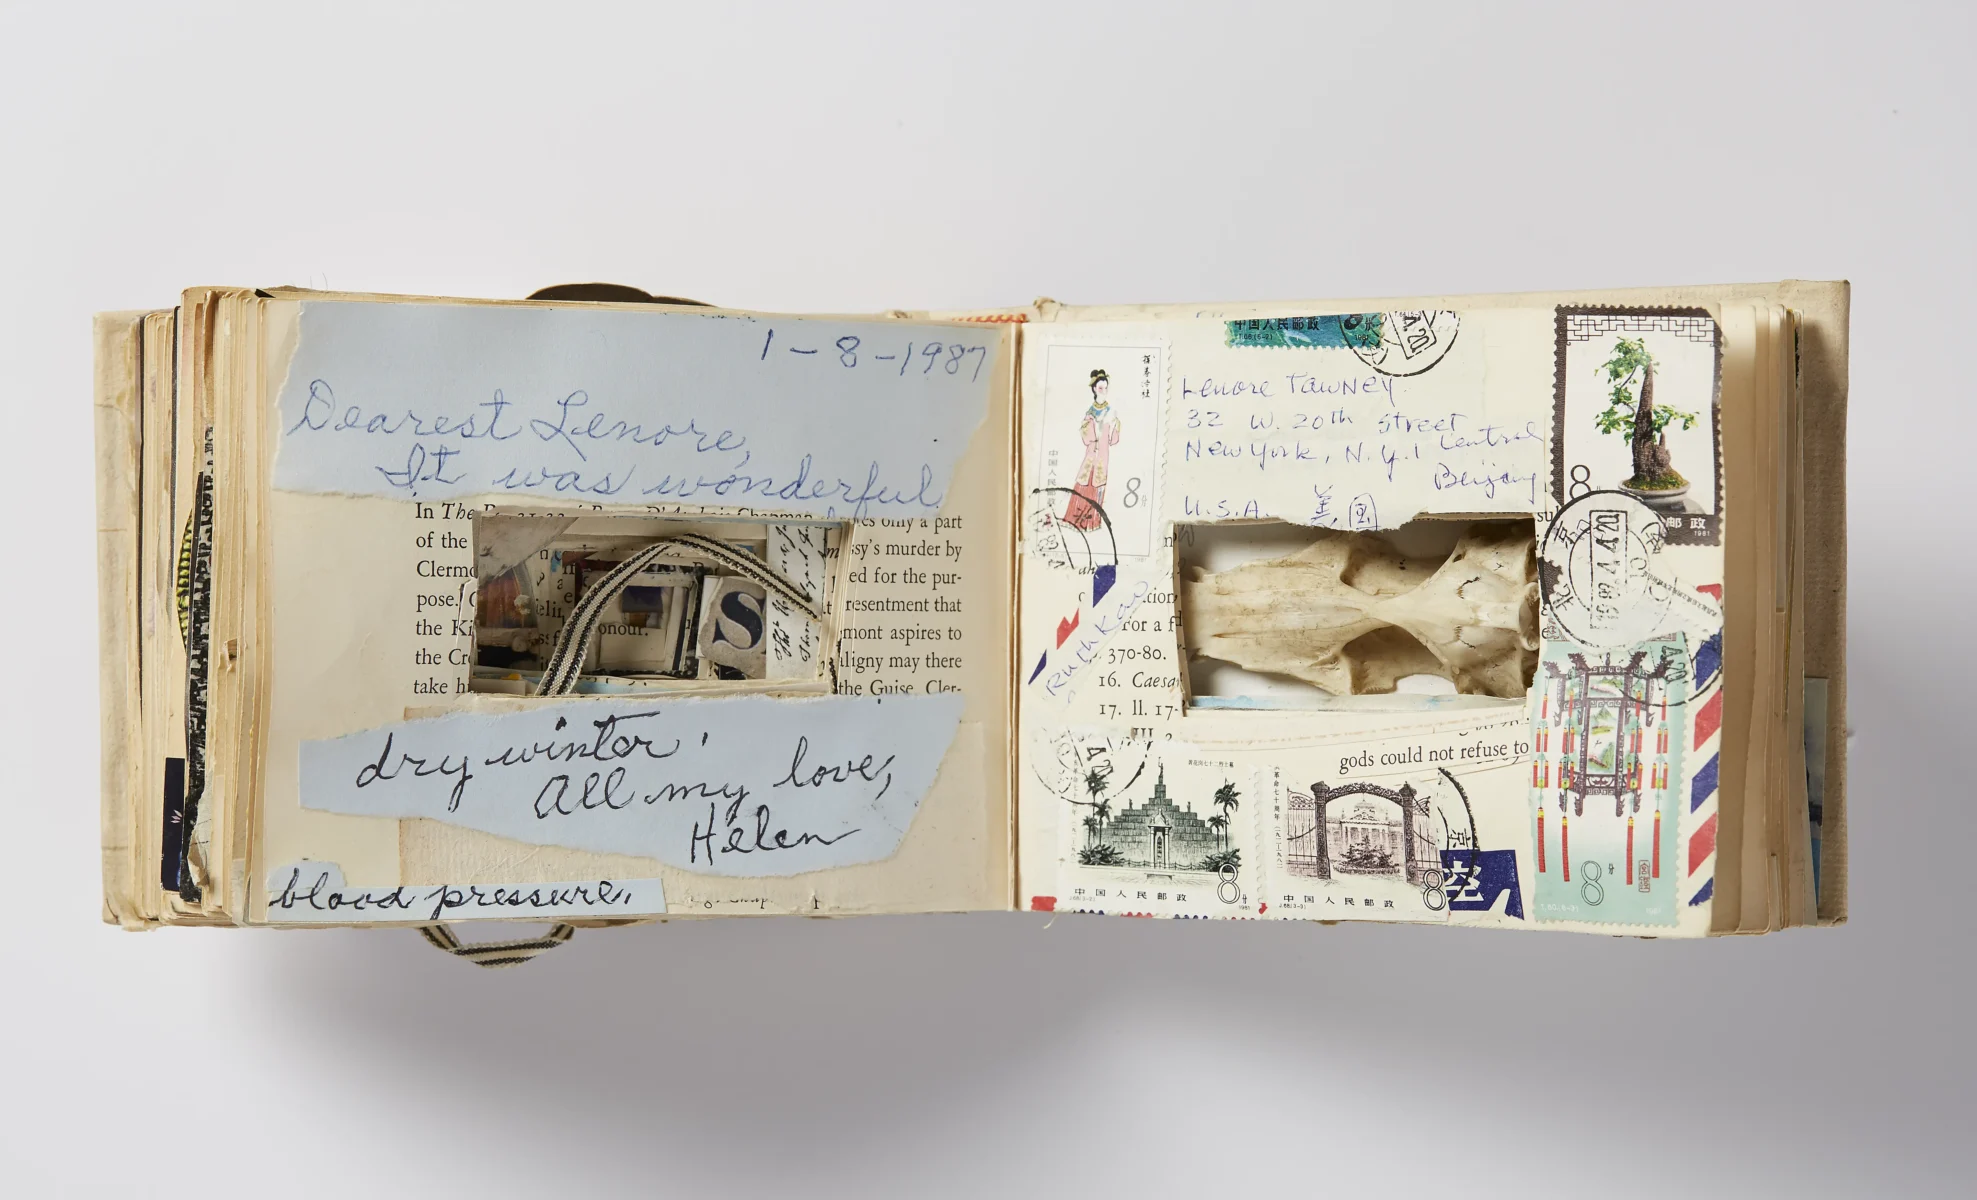 Artist book with rodent skull, c. 1985